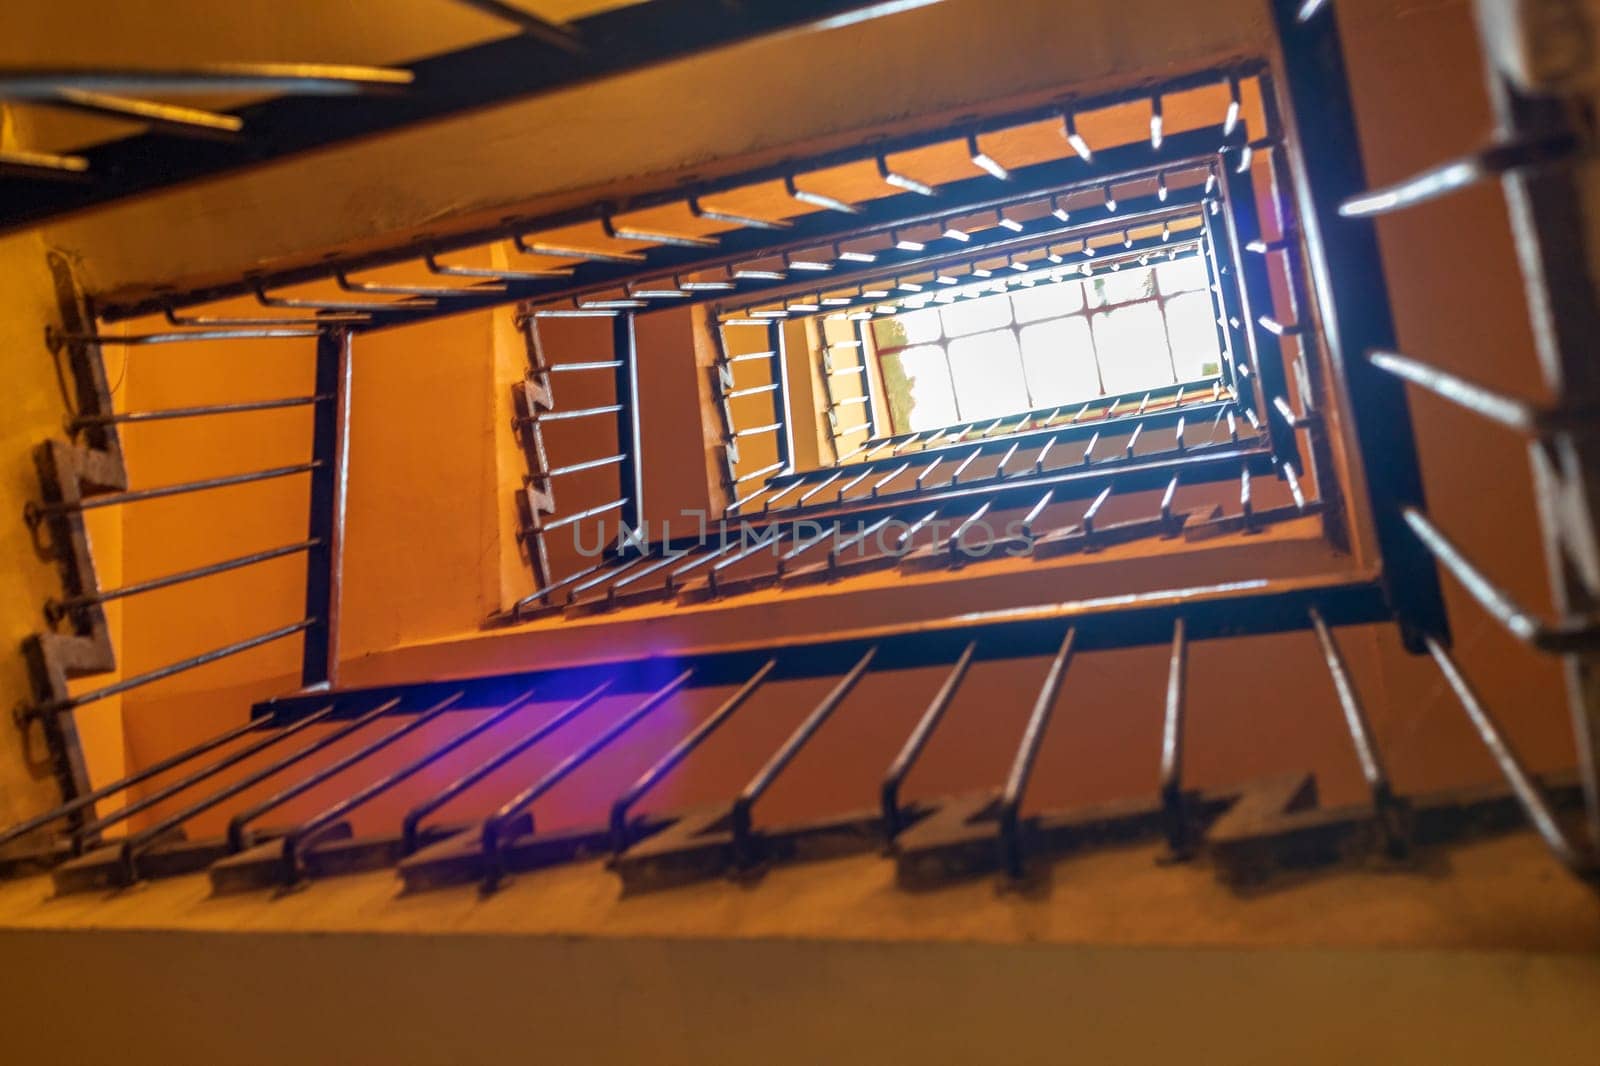 Up view of the staircase in the building. Horizontal view